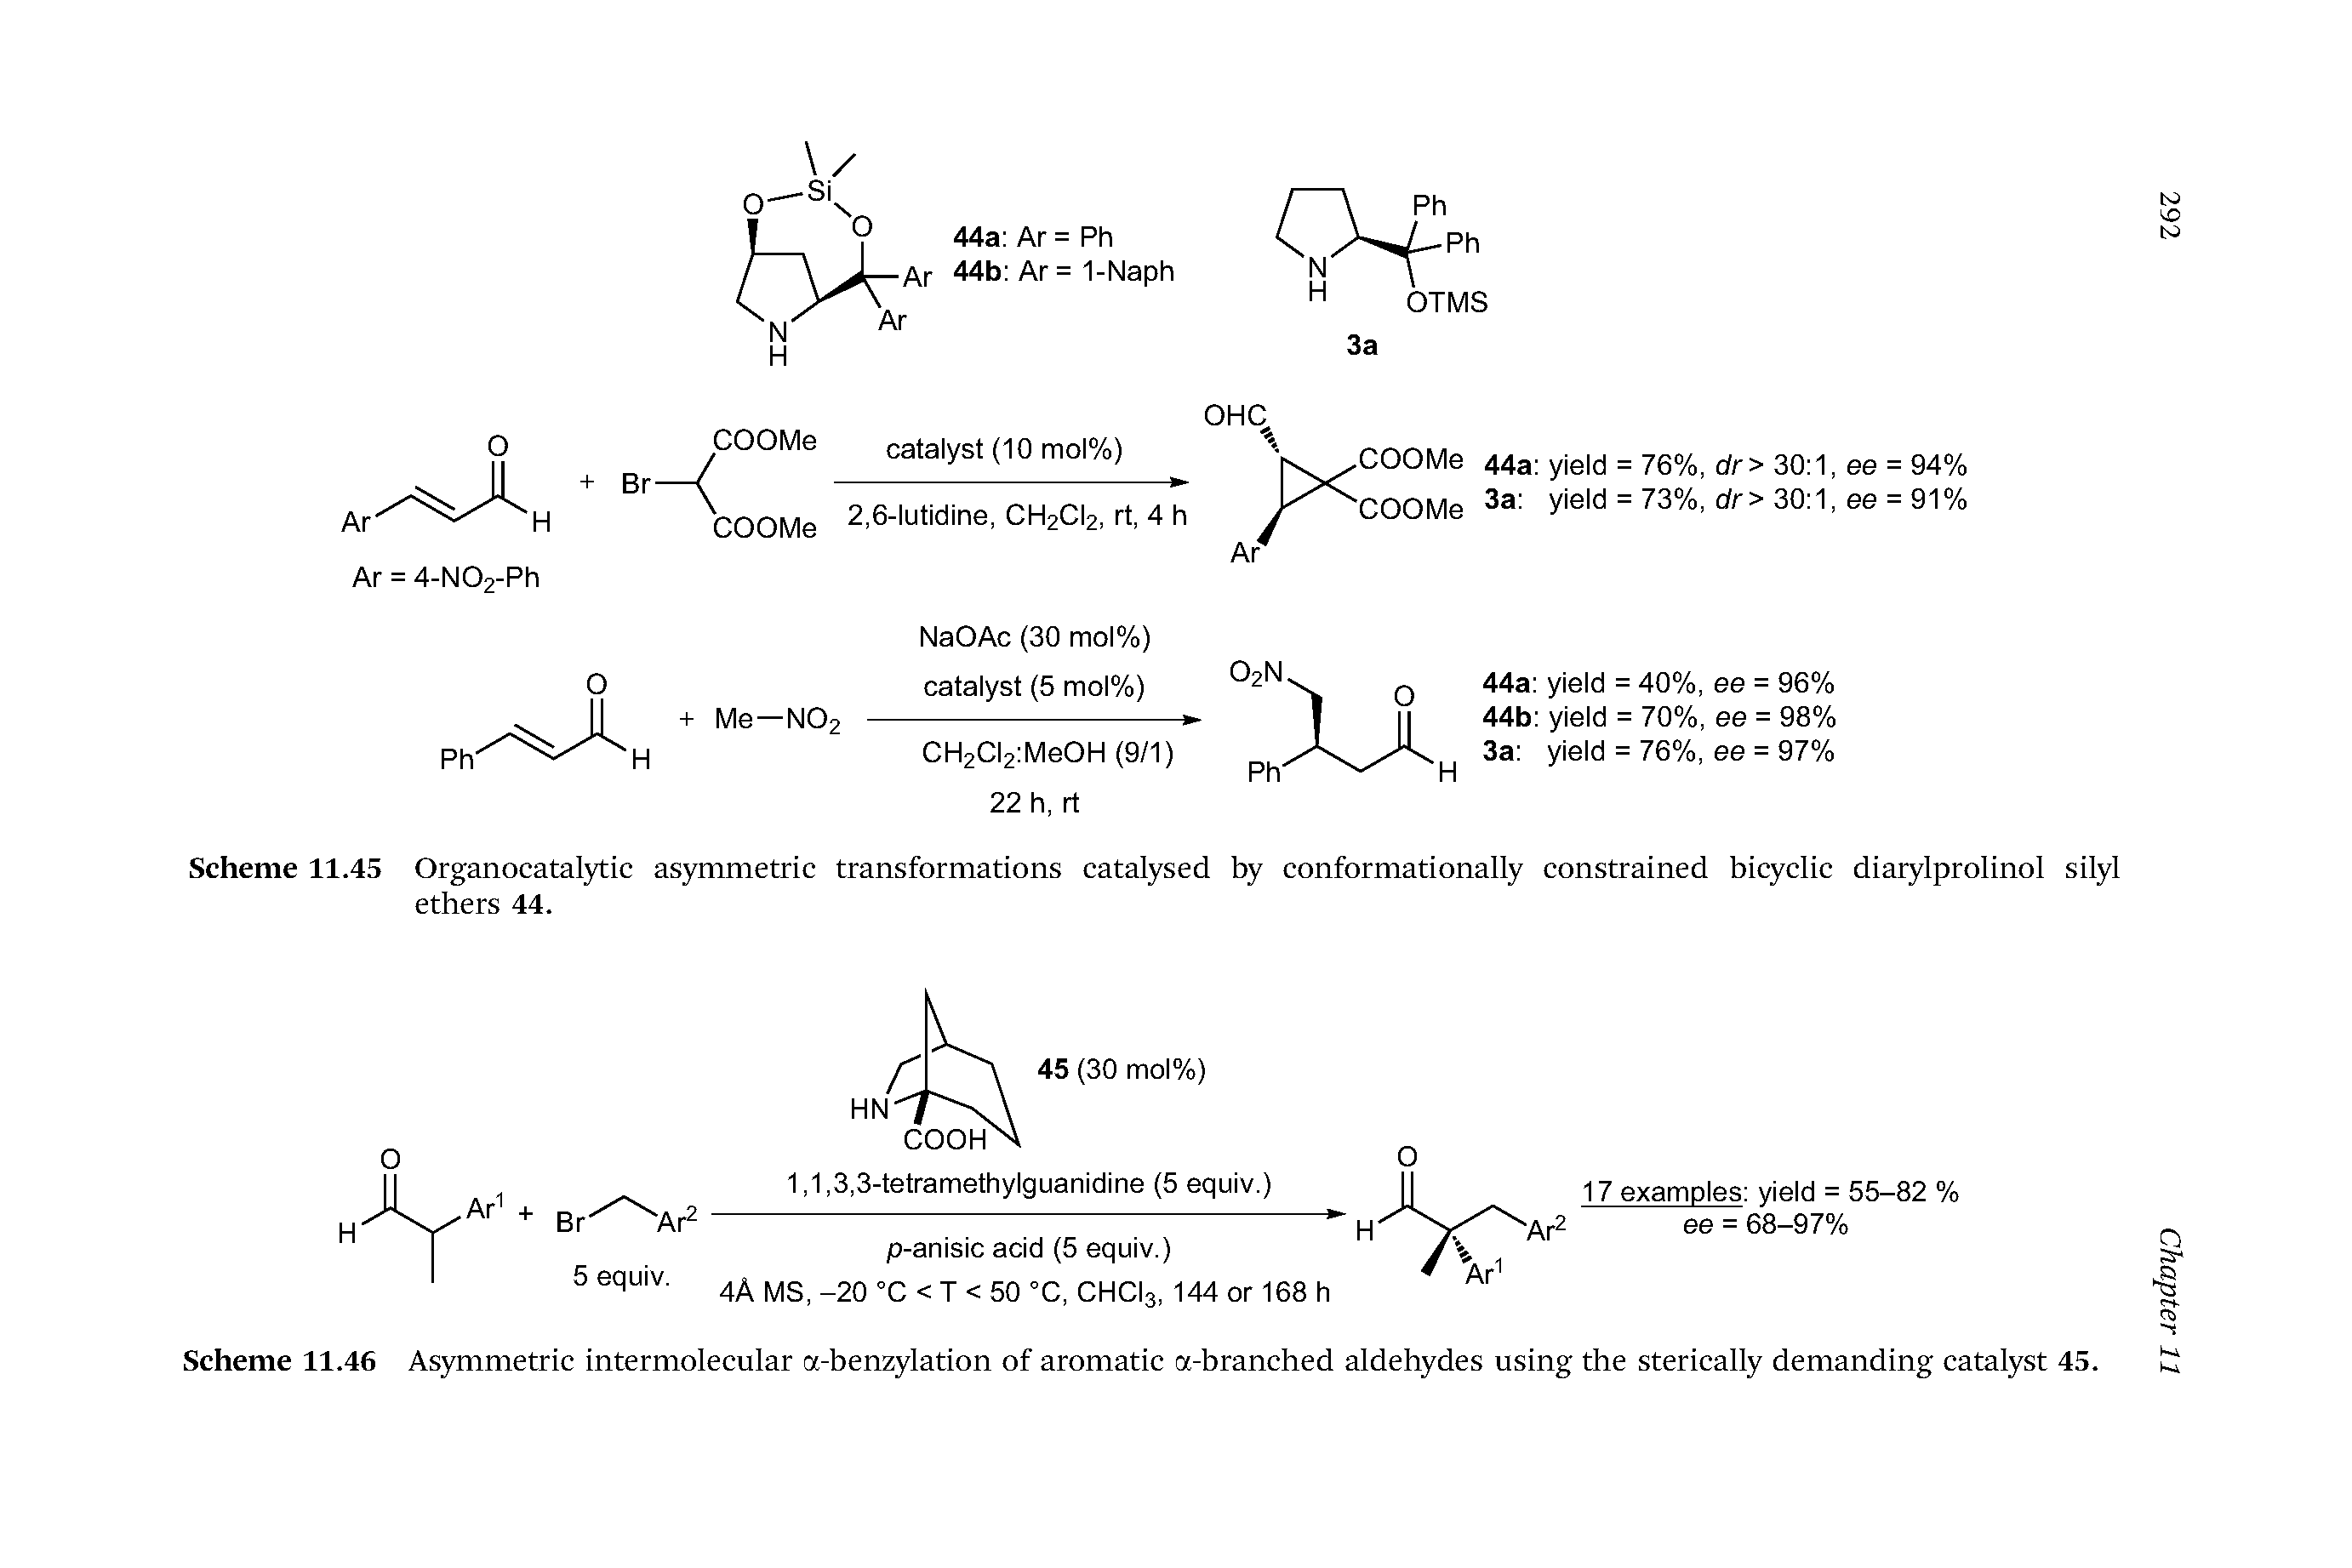 Scheme 11.46 Asymmetric intermolecular a-benzylation of aromatic a-branched aldehydes using the sterically demanding catalyst 45.